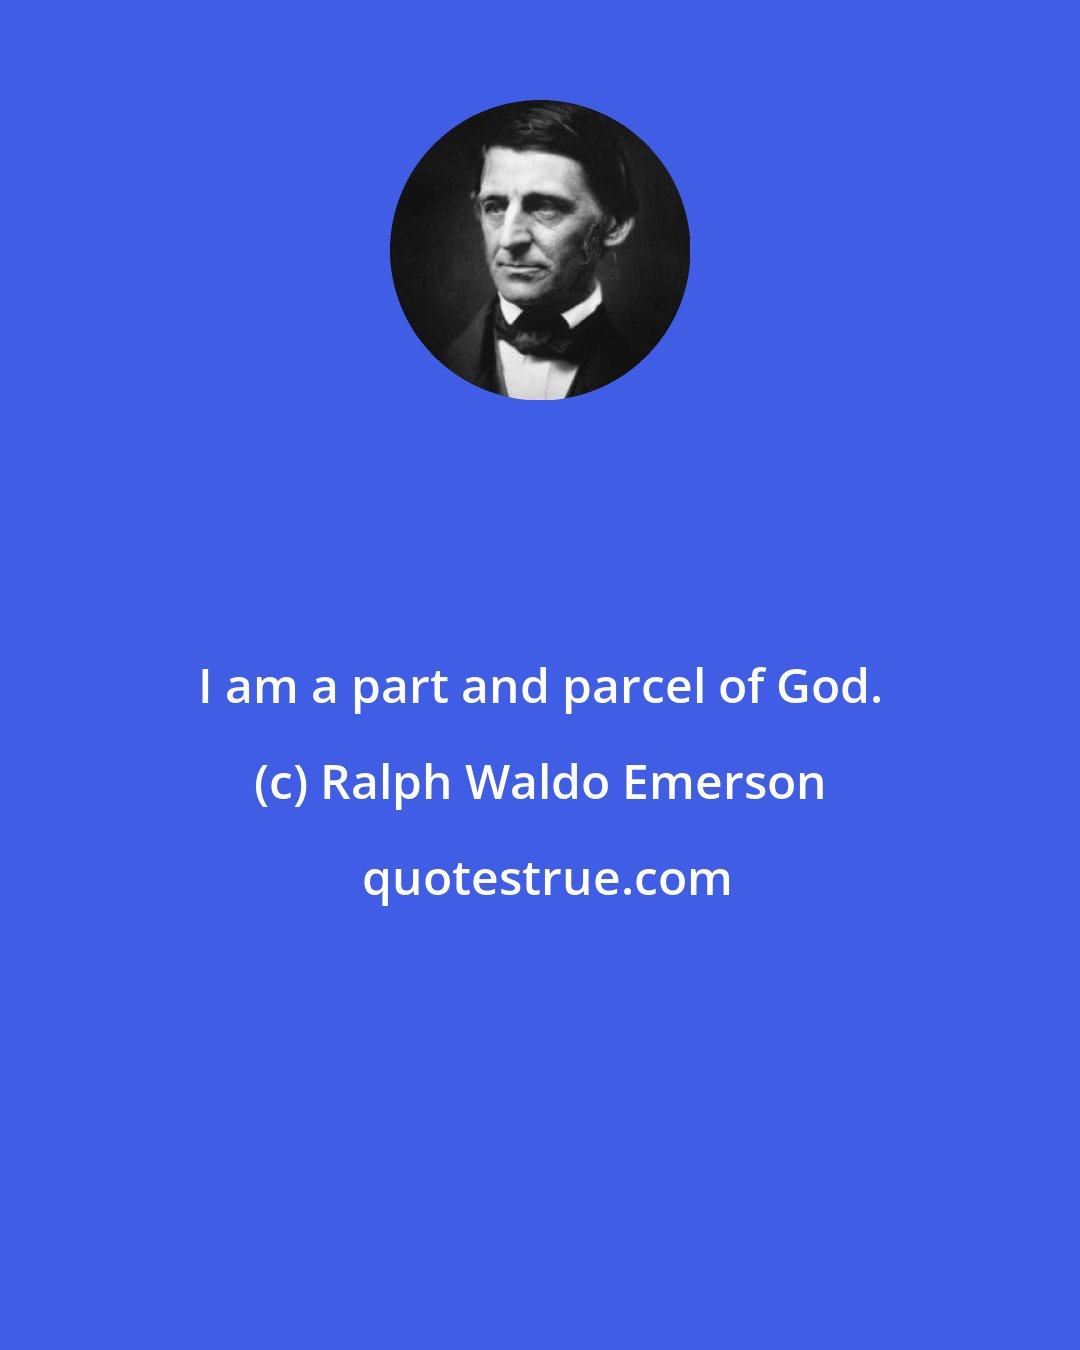 Ralph Waldo Emerson: I am a part and parcel of God.